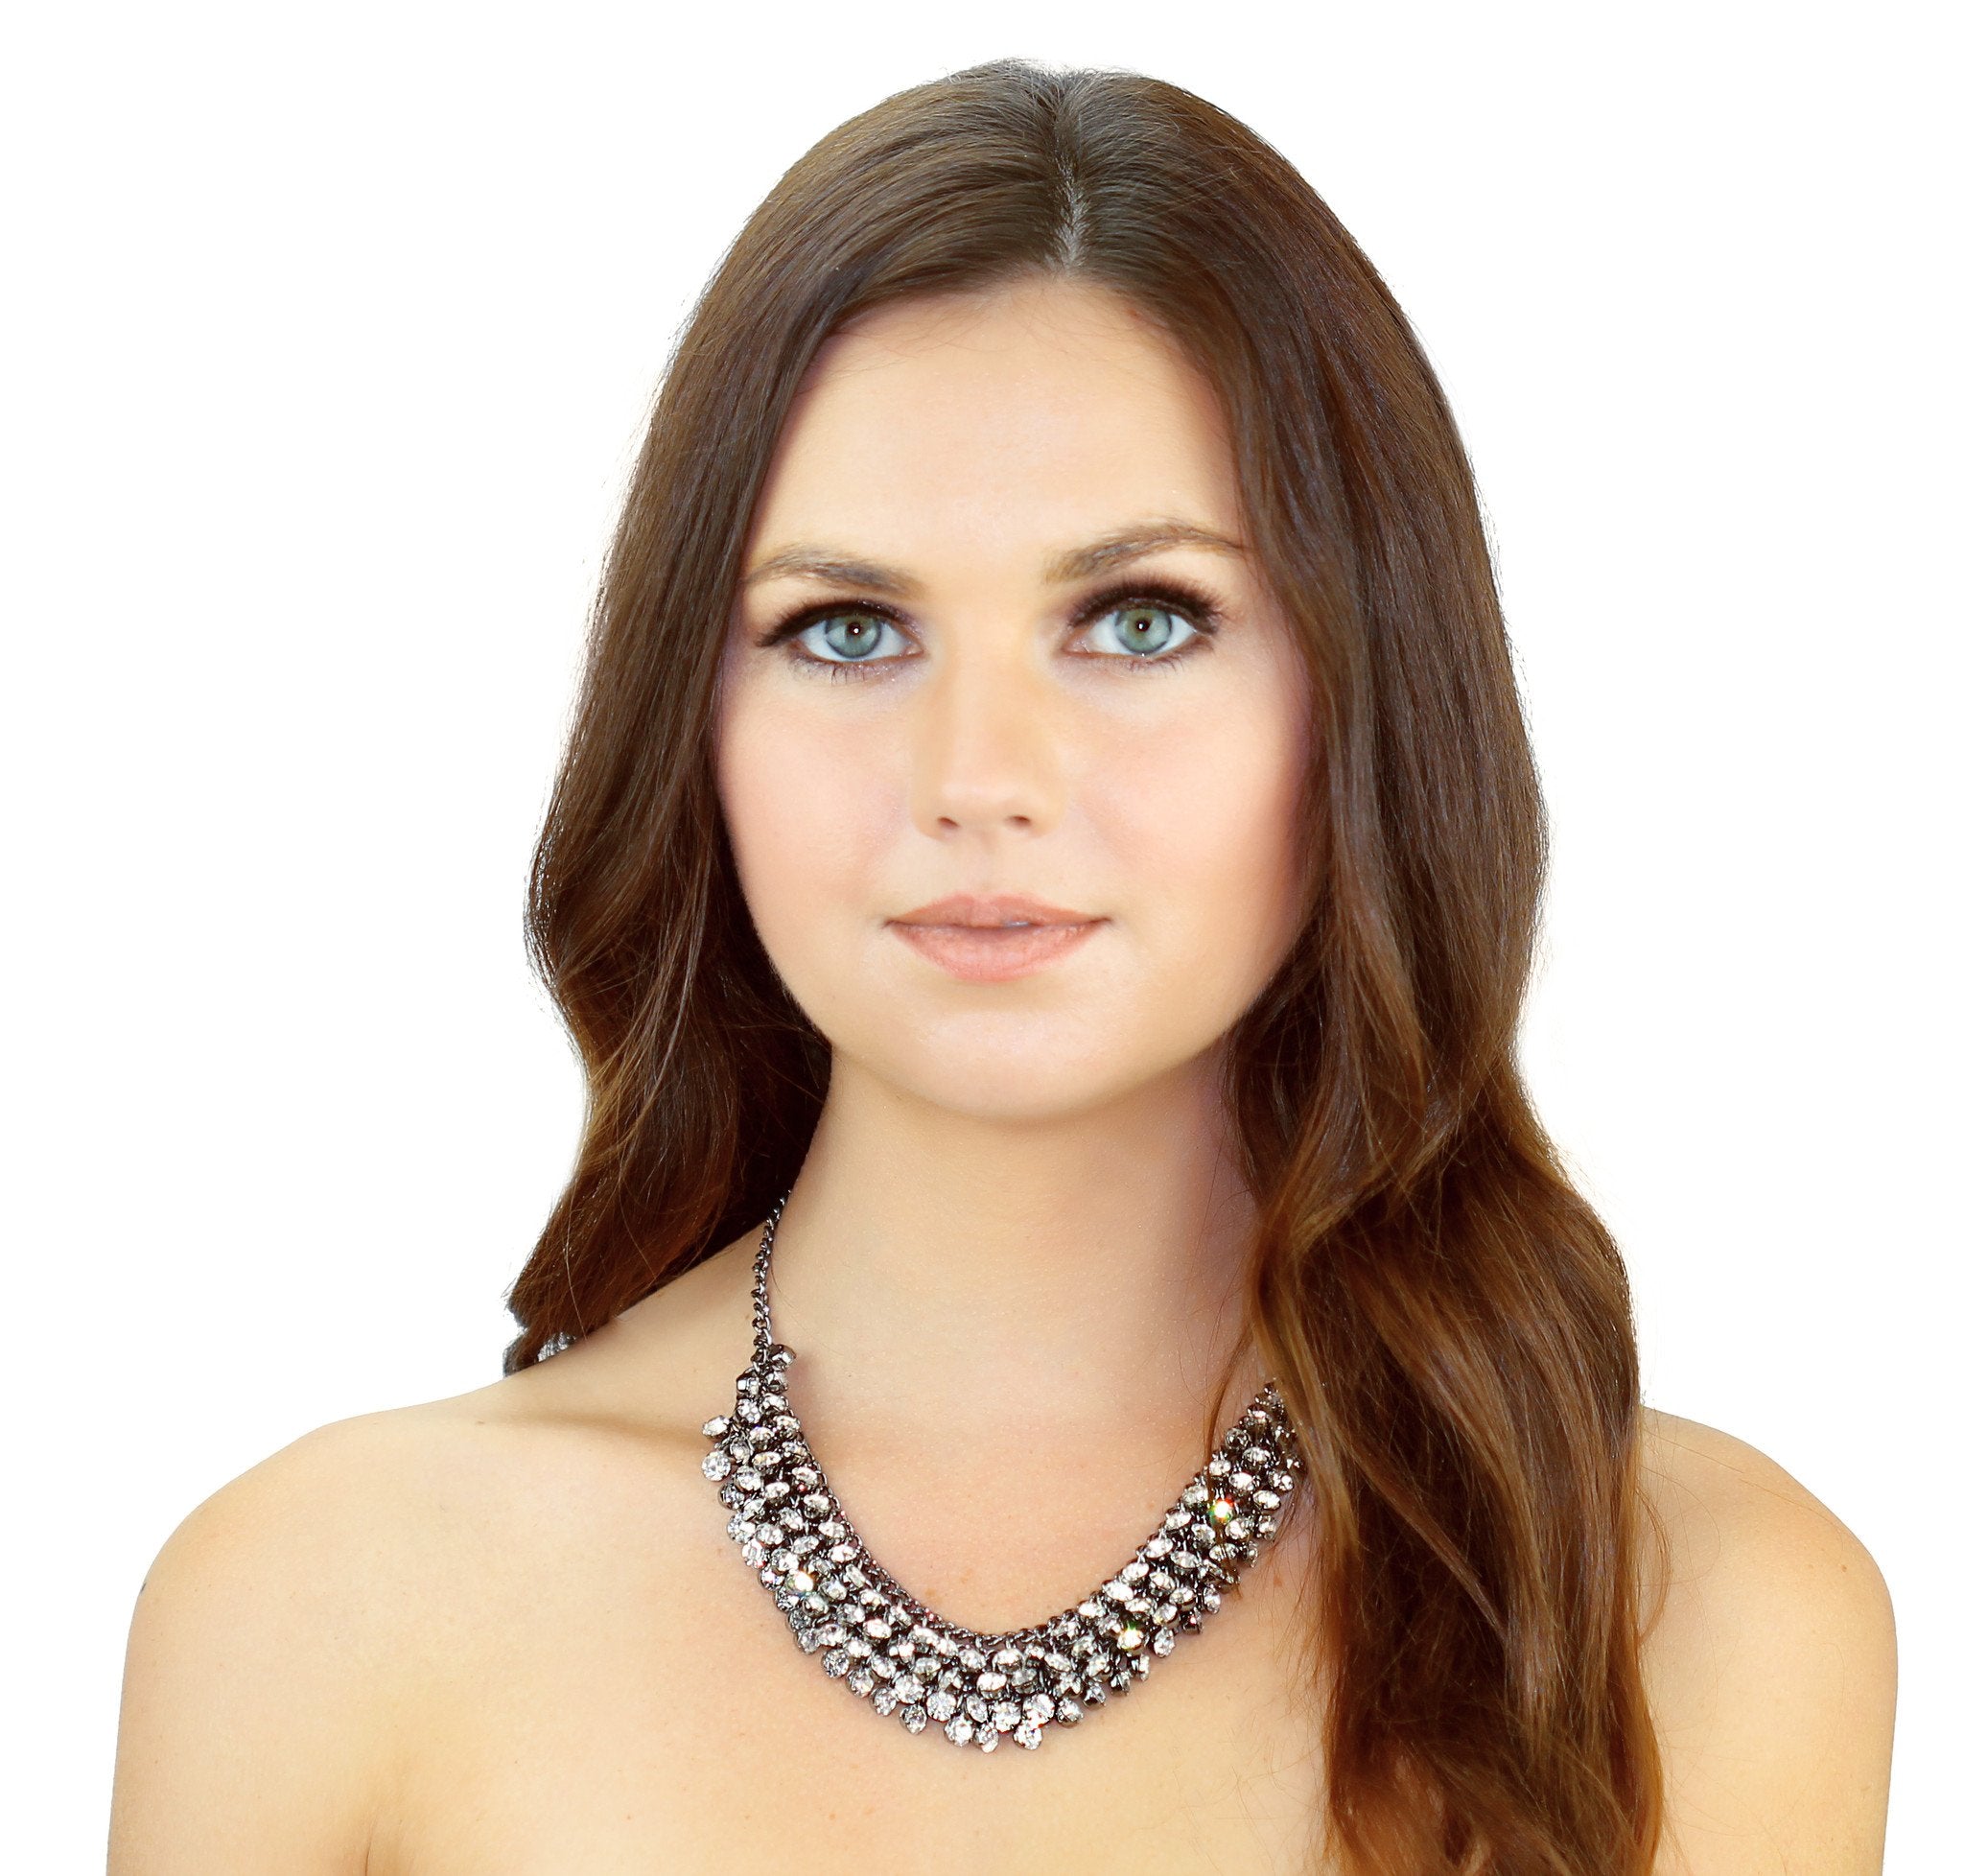 Hypoallergenic Crystal Collar Necklace with 140+ Glass Crystals - Dark Silver Graphite Tone Chain
Looking for a stunning hypoallergenic crystal collar necklace? Our necklace features over 140+ glass crystals for just the right amount of sparkle. - Necklaces - Bijou Her -  -  - 